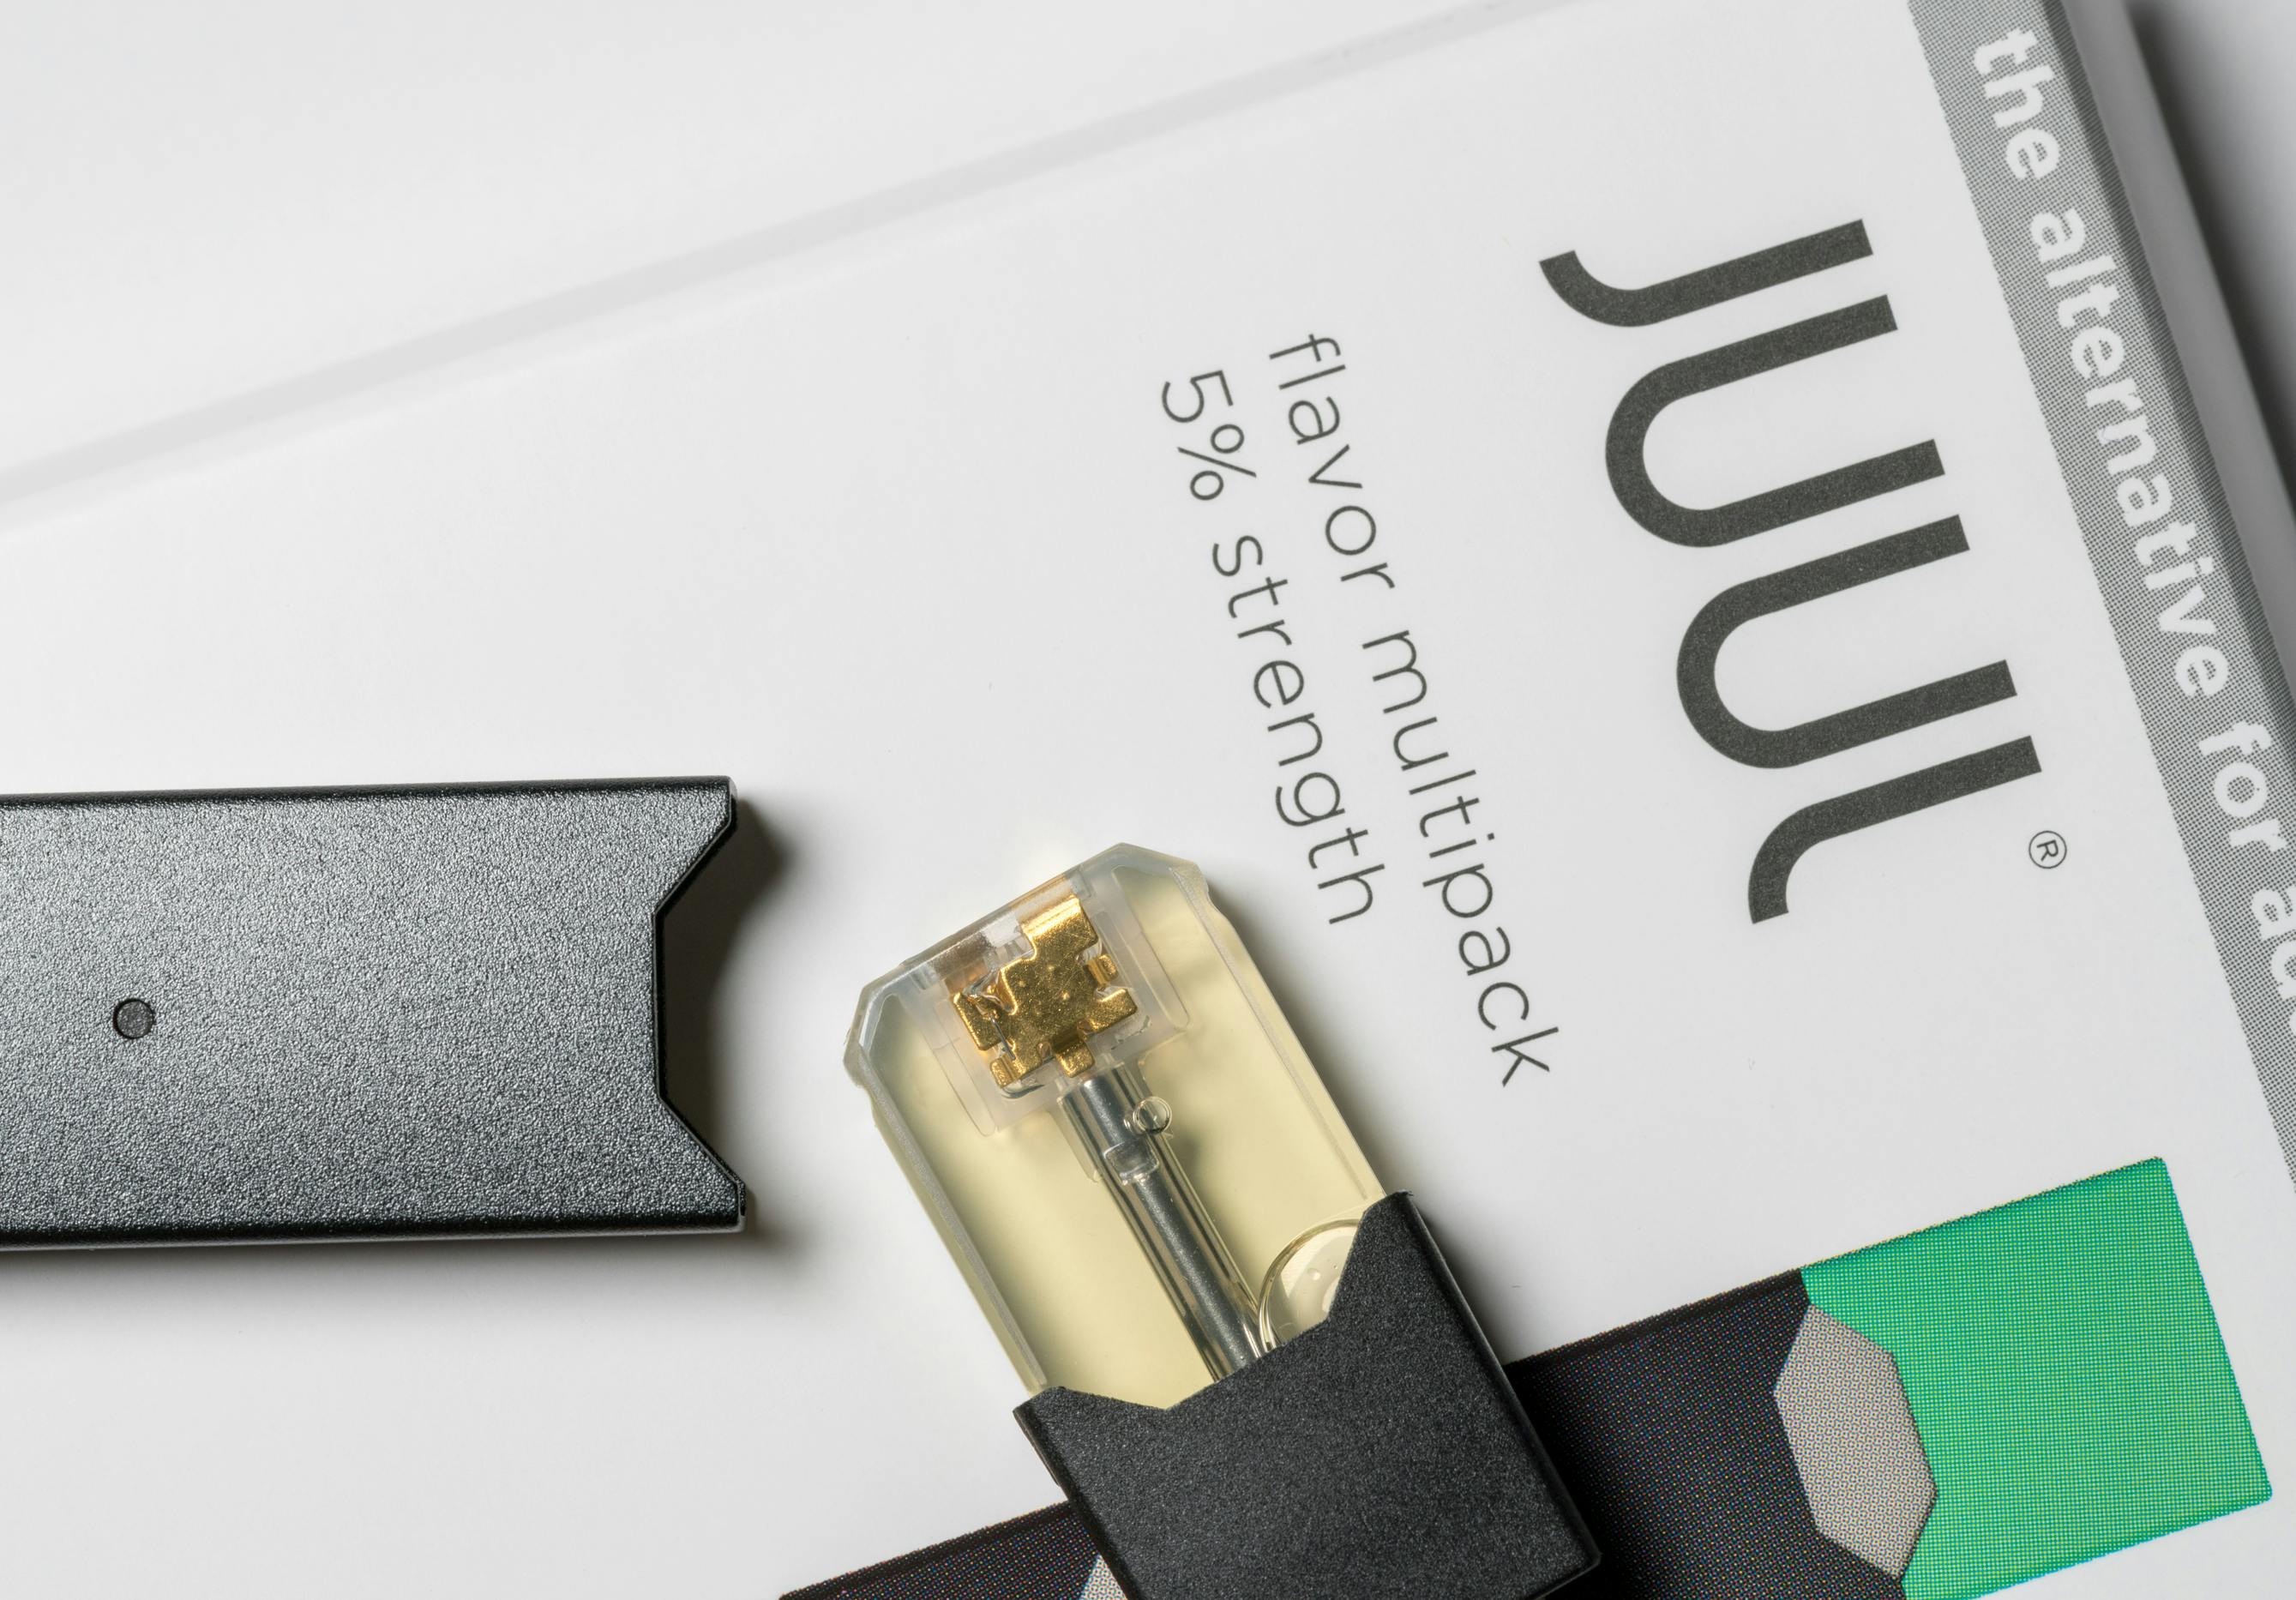 Juul with pod and package